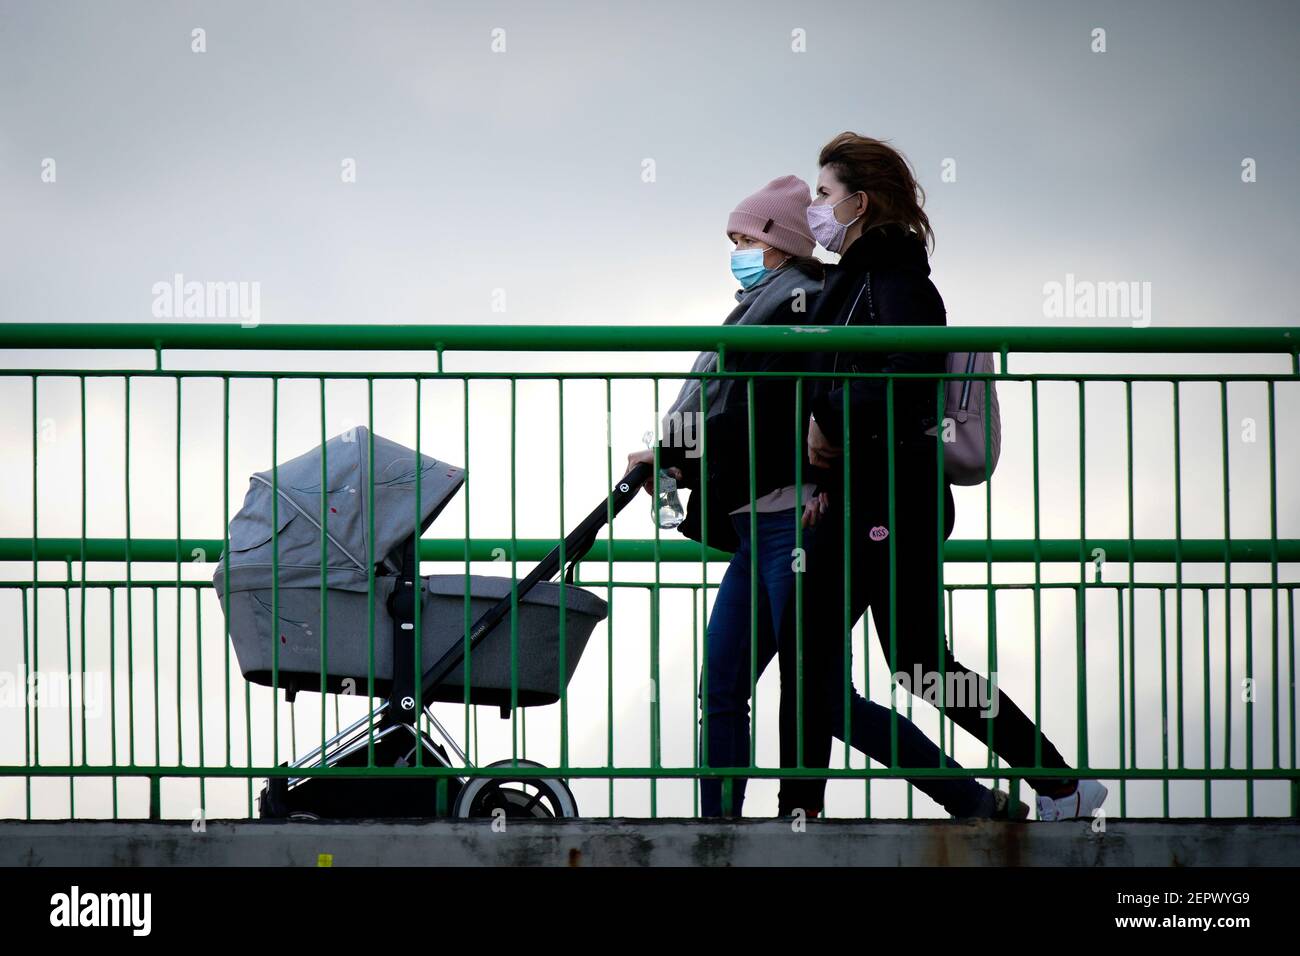 (210228) -- WARSAW, Feb. 28, 2021 (Xinhua) -- Two women wearing face masks are seen with a stroller crossing a bridge in Warsaw, Poland, on Feb. 27, 2021.  The Polish government announced new restrictions on Wednesday in an effort to curb a recent rise in new COVID-19 infections officially dubbed the 'third wave.'   Health Minister Adam Niedzielski said that the rules on face covering will be tightened, mandating the use of masks in public spaces starting on Saturday instead of the previously allowed alternatives, such as scarfs and visors.   Also starting on Saturday, travelers from southern Stock Photo